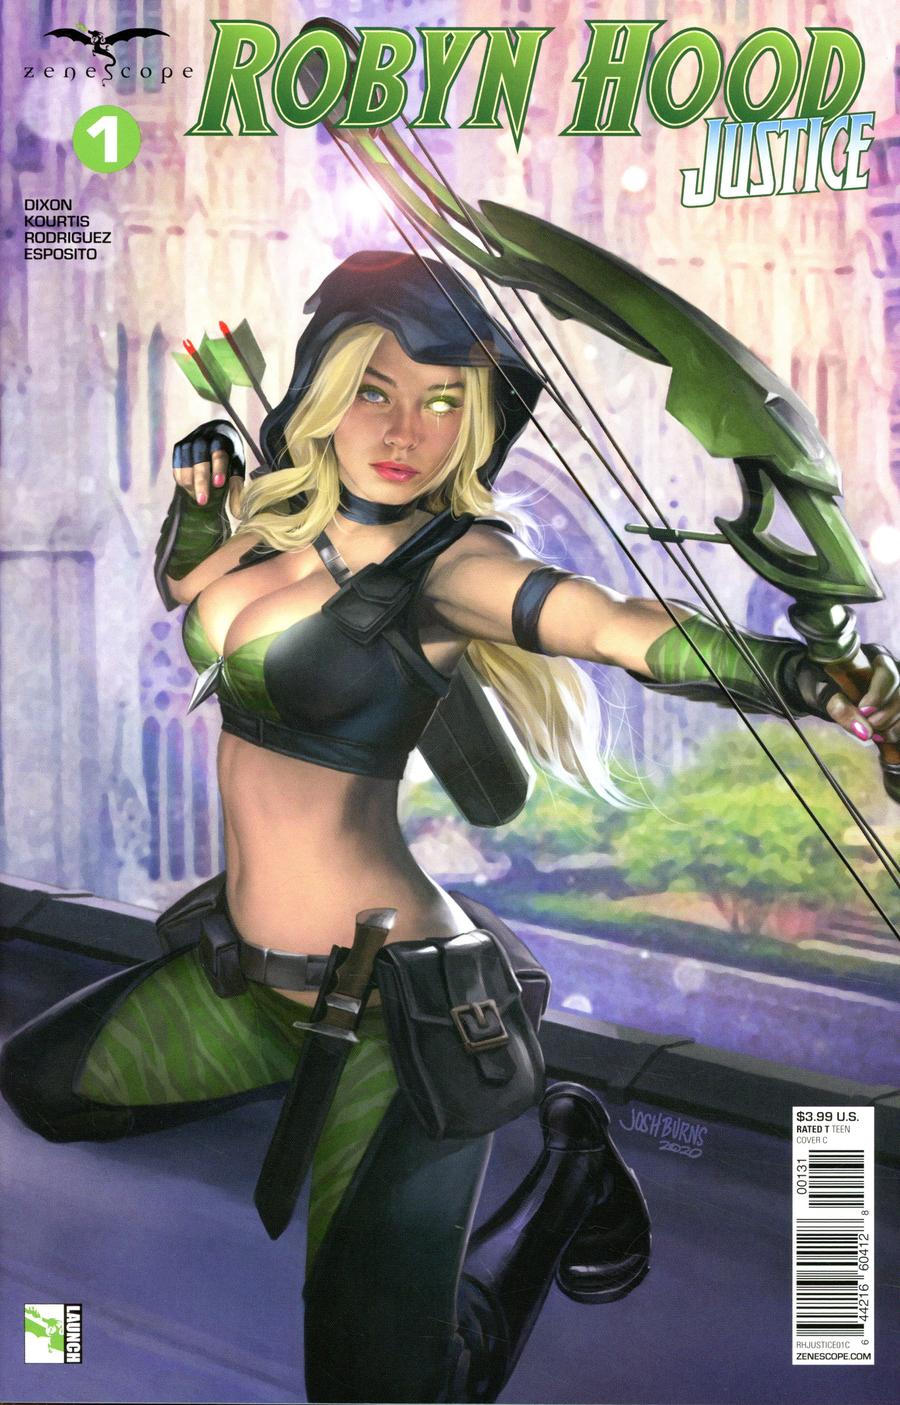 Grimm Fairy Tales Presents Robyn Hood Justice #1 Cover C Josh Burns